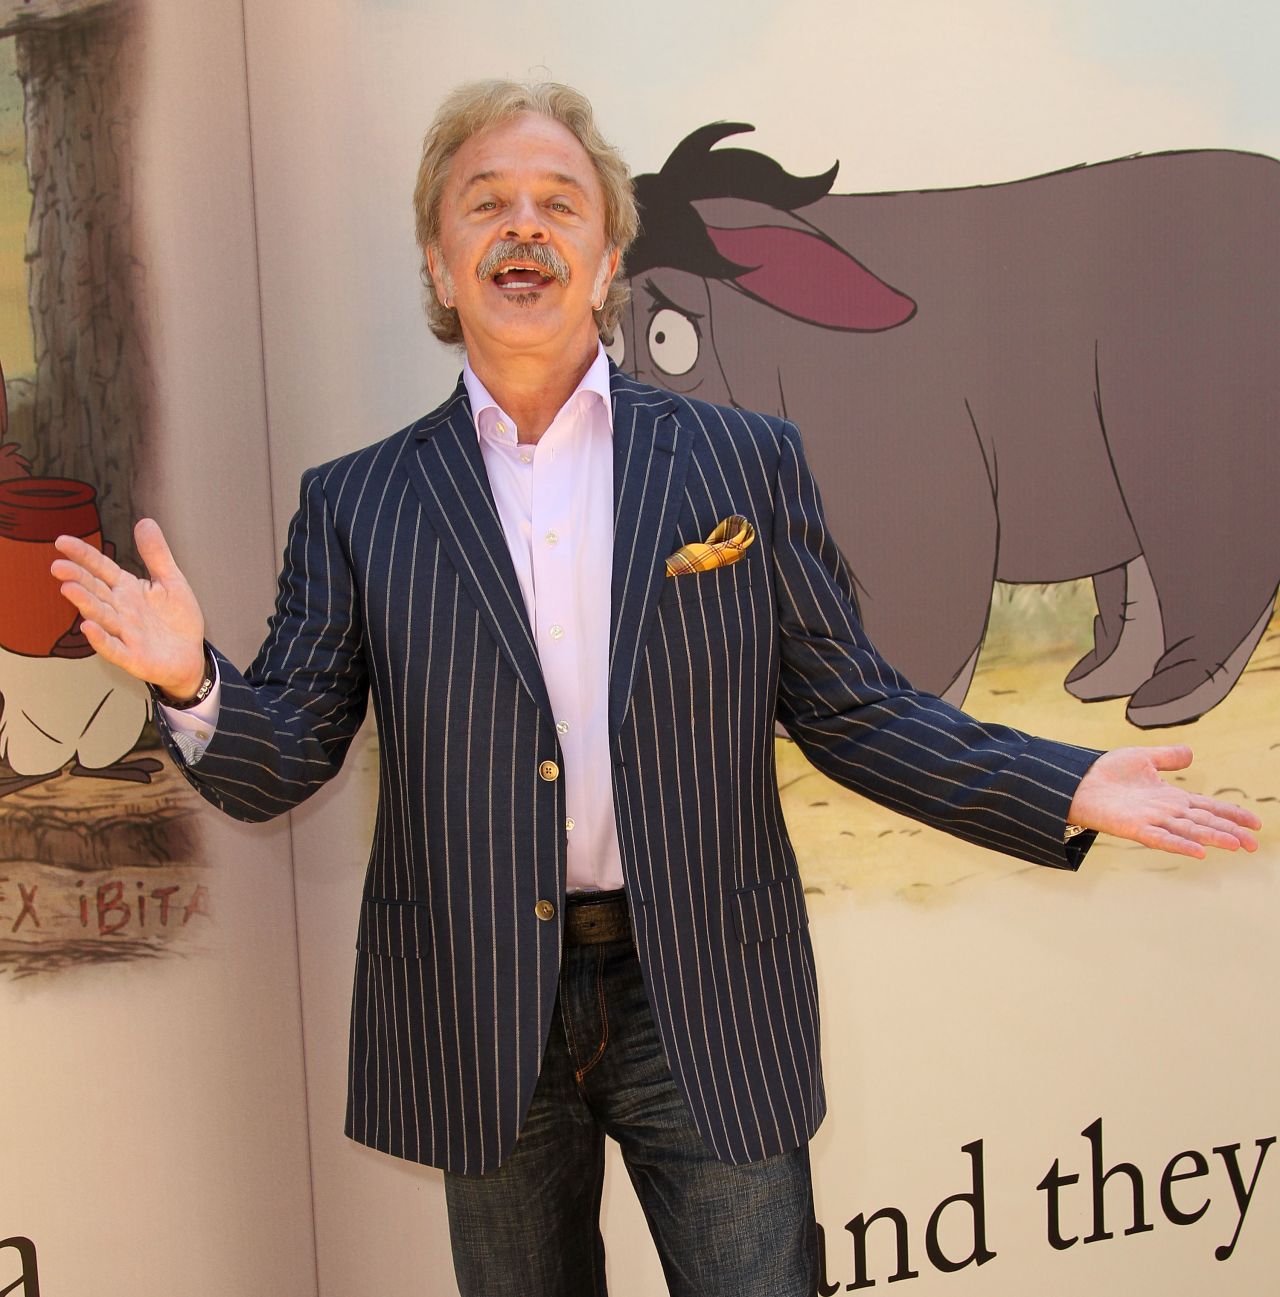 Jim Cummings has been a denizen of the Hundred Acre Woods for almost a quarter century. He is the third actor to portray Winnie the Pooh in the various Disney films and cartoon series, following Sterling Holloway and Hal Smith. He is also the current voice of Tigger. On the Warner Bros. side of things, he has played the Tasmanian Devil for many years  1990s cartoon fans will remember him as Darkwing Duck. 